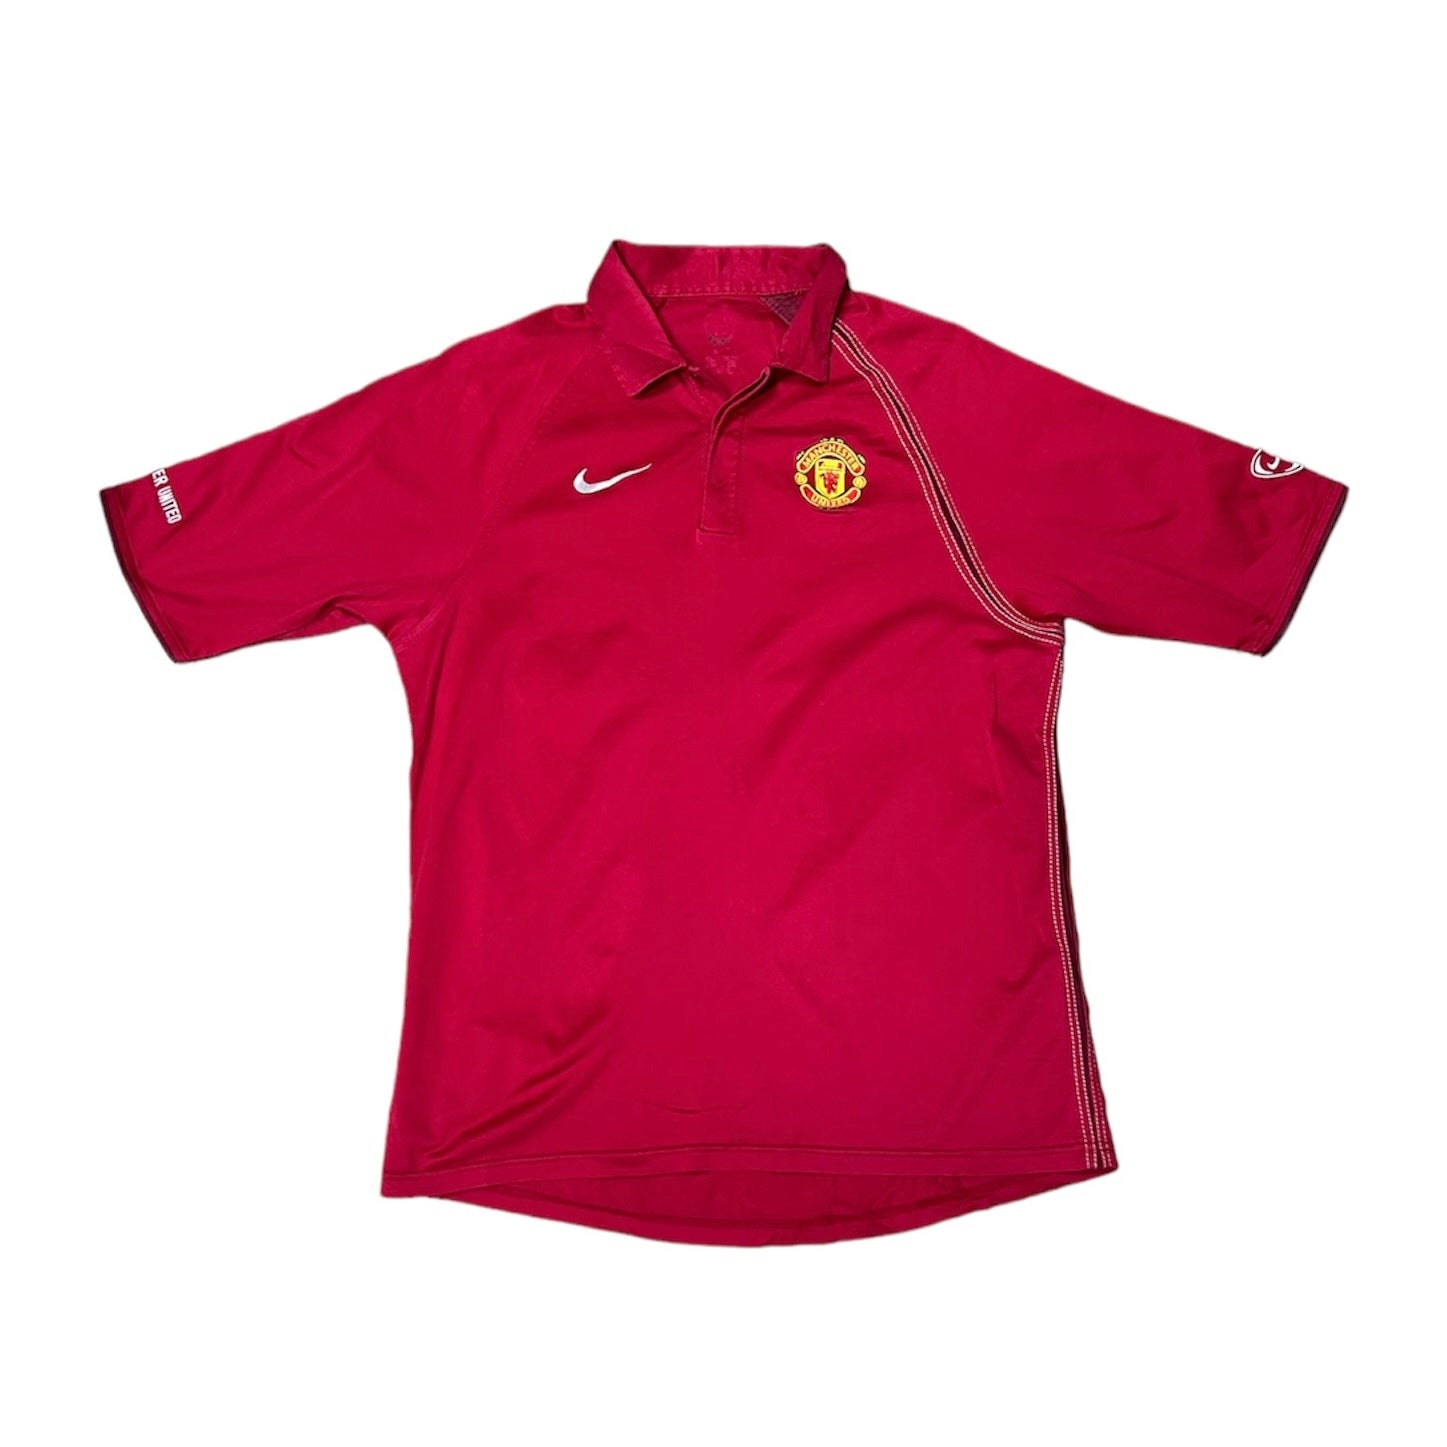 Nike Manchester United 2000s Polo Football Training Jersey